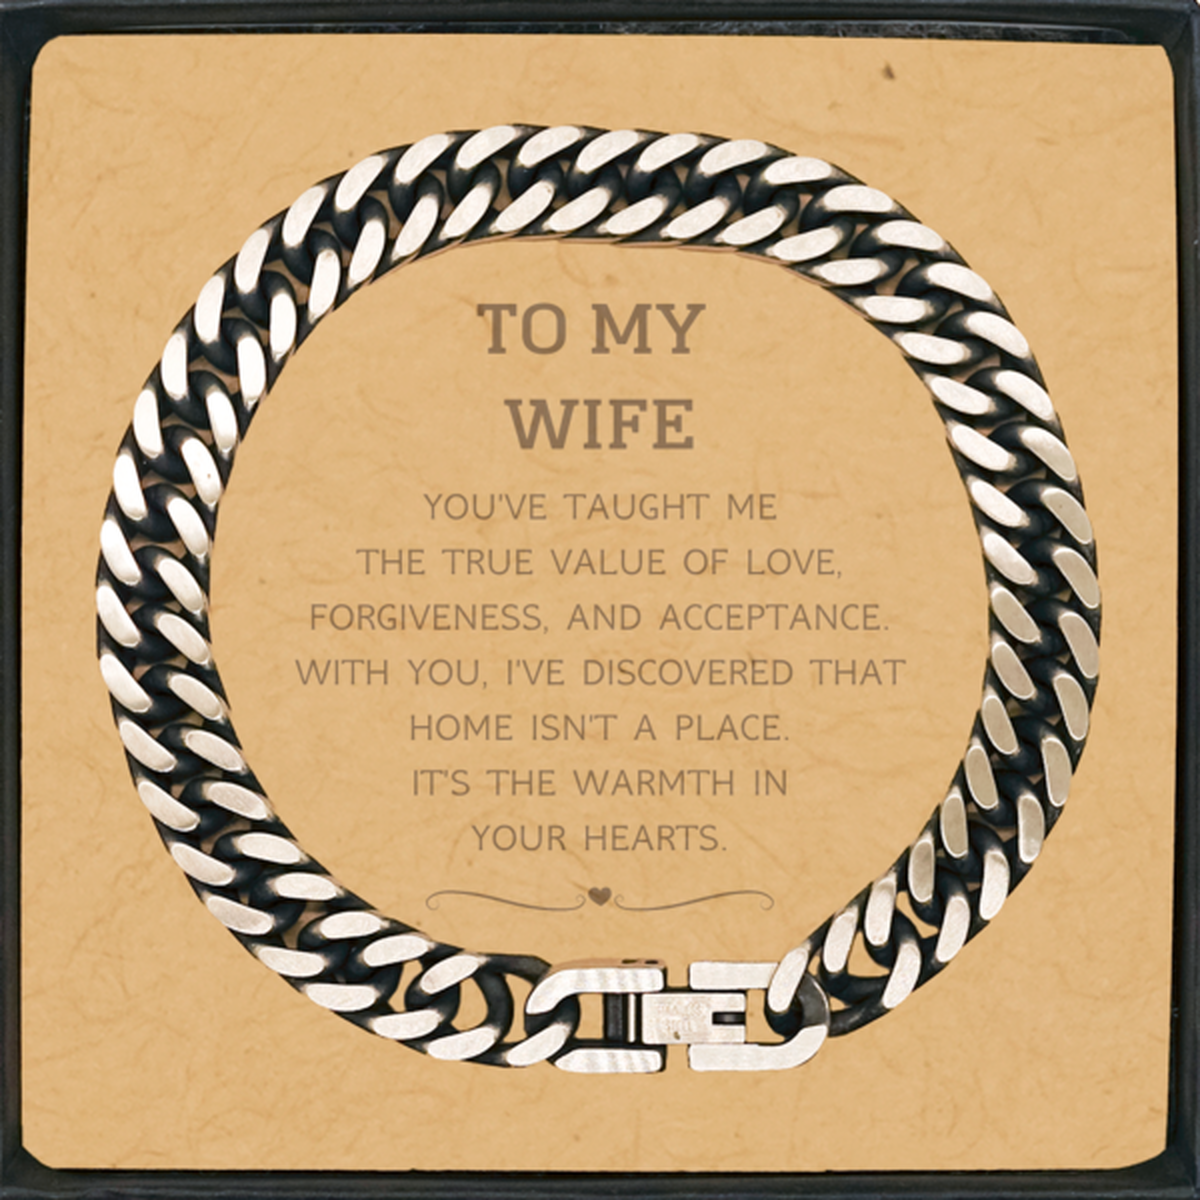 To My Wife Gifts, You've taught me the true value of love, Thank You Gifts For Wife, Birthday Cuban Link Chain Bracelet For Wife